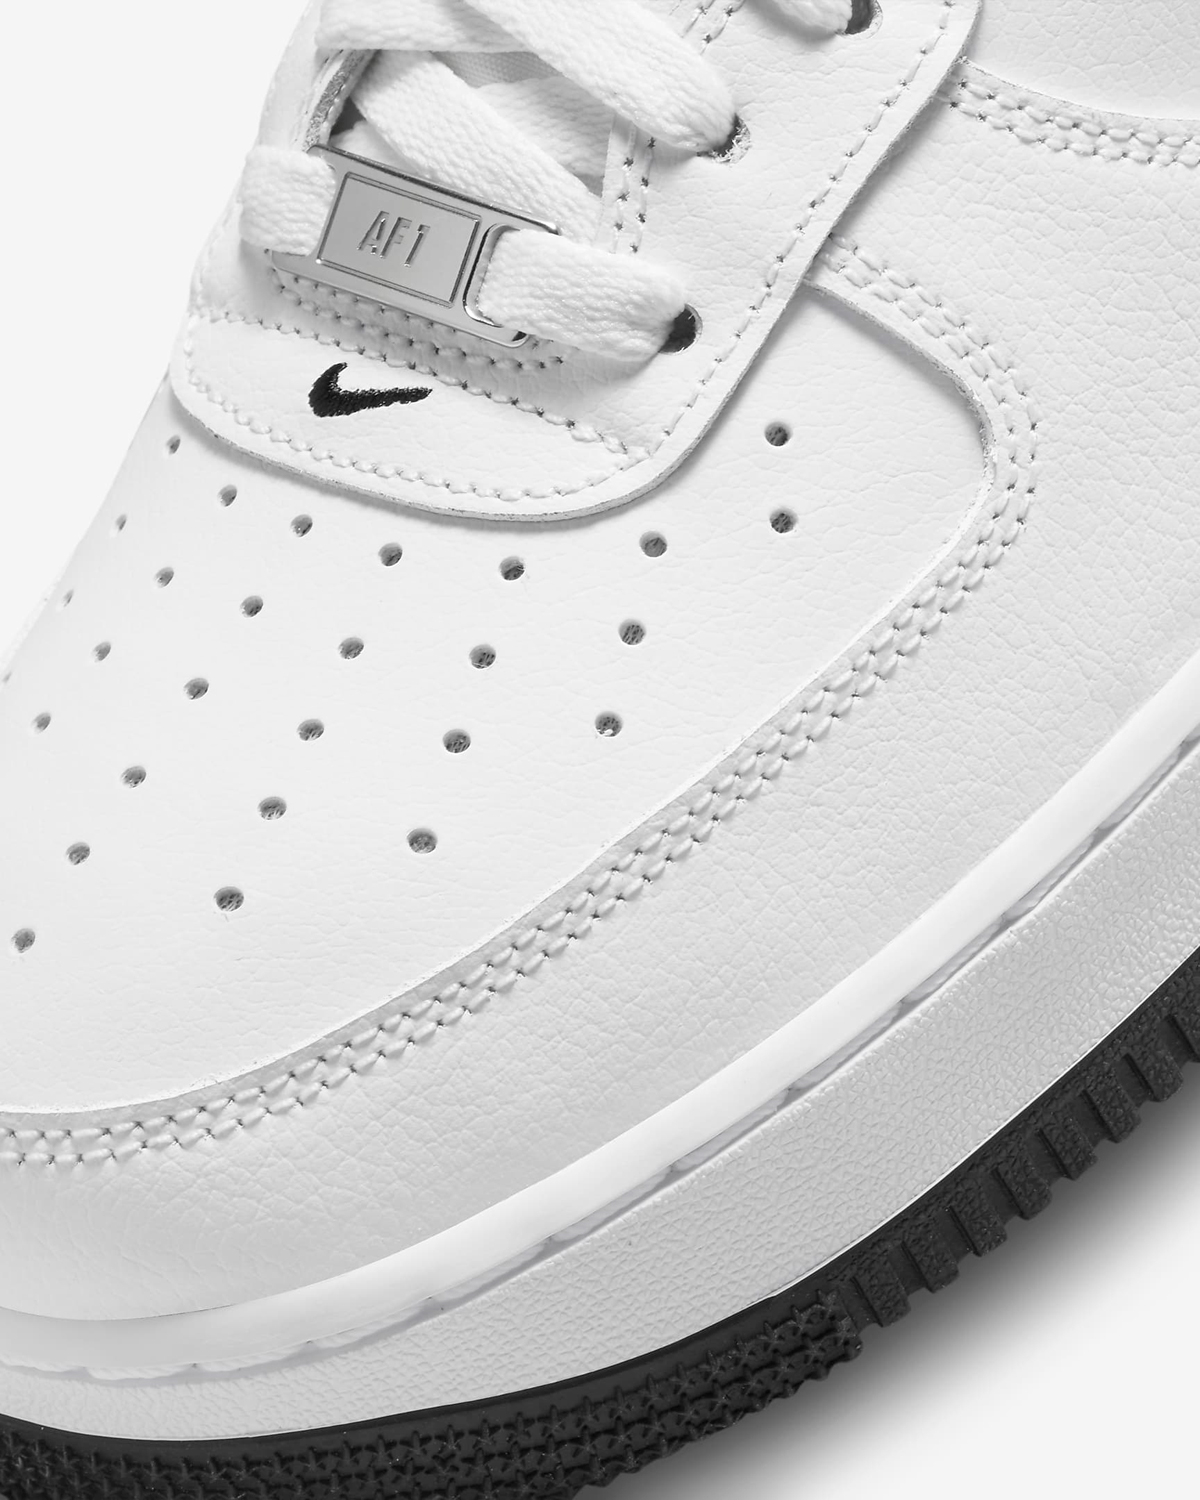 nike-air-force-1-low-white-black-2022-release-date-7